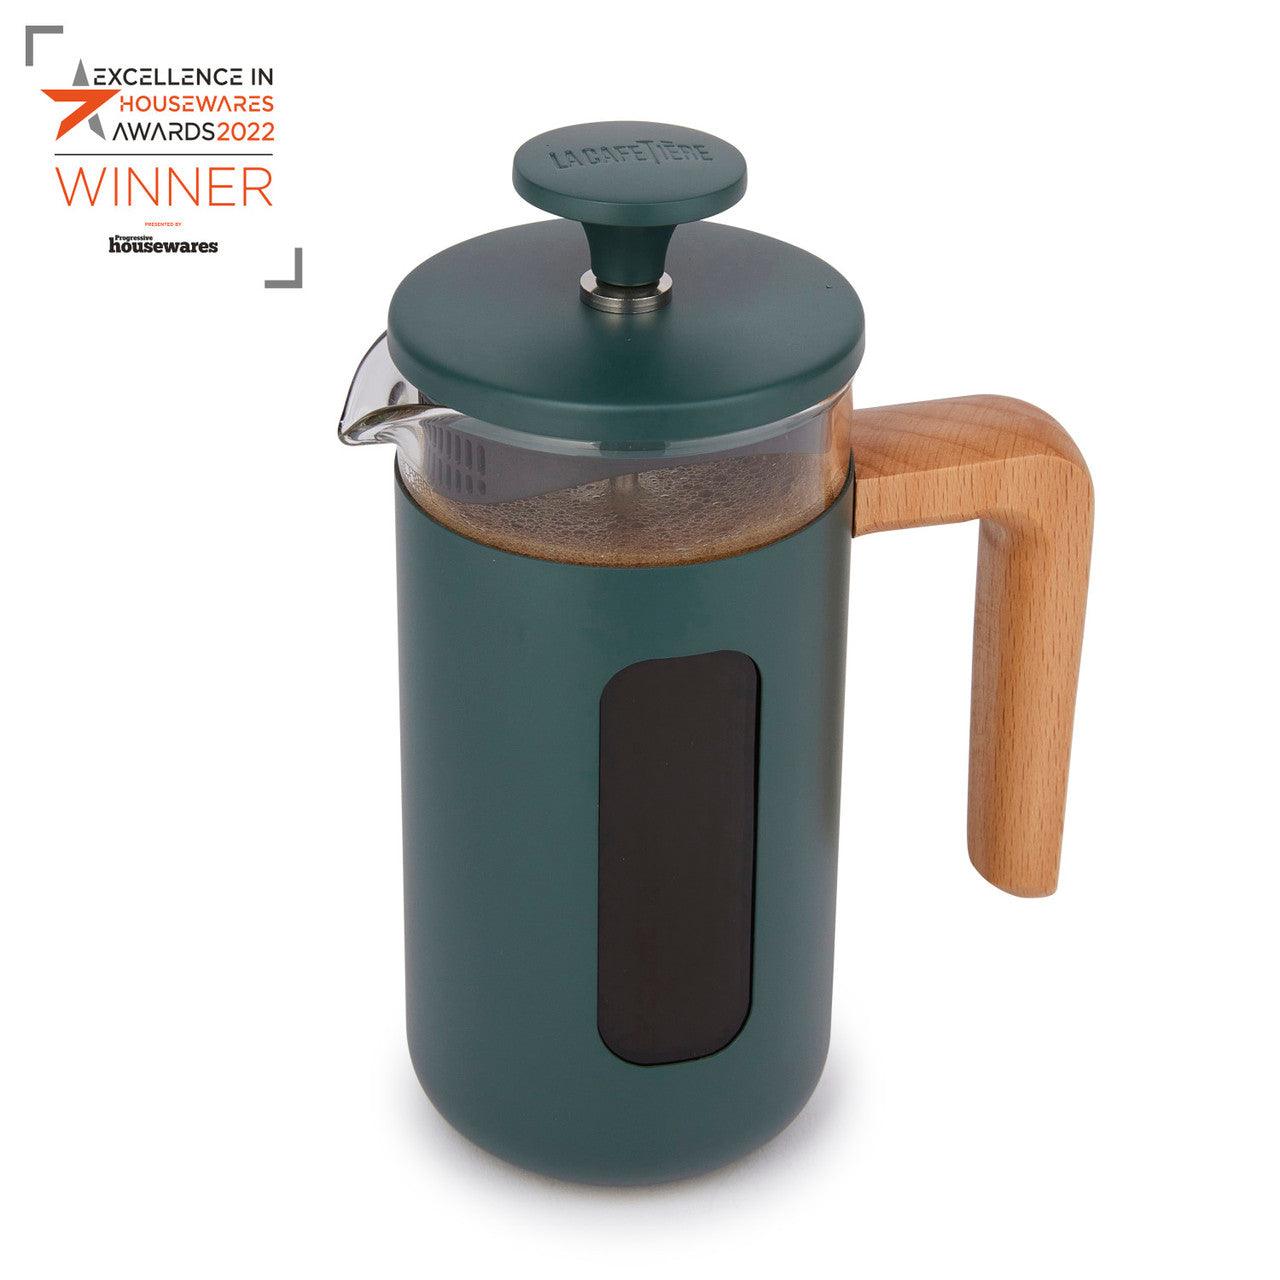 La Cafetière Pisa Cafetiere, 3-Cup, Green - RUTHERFORD & Co